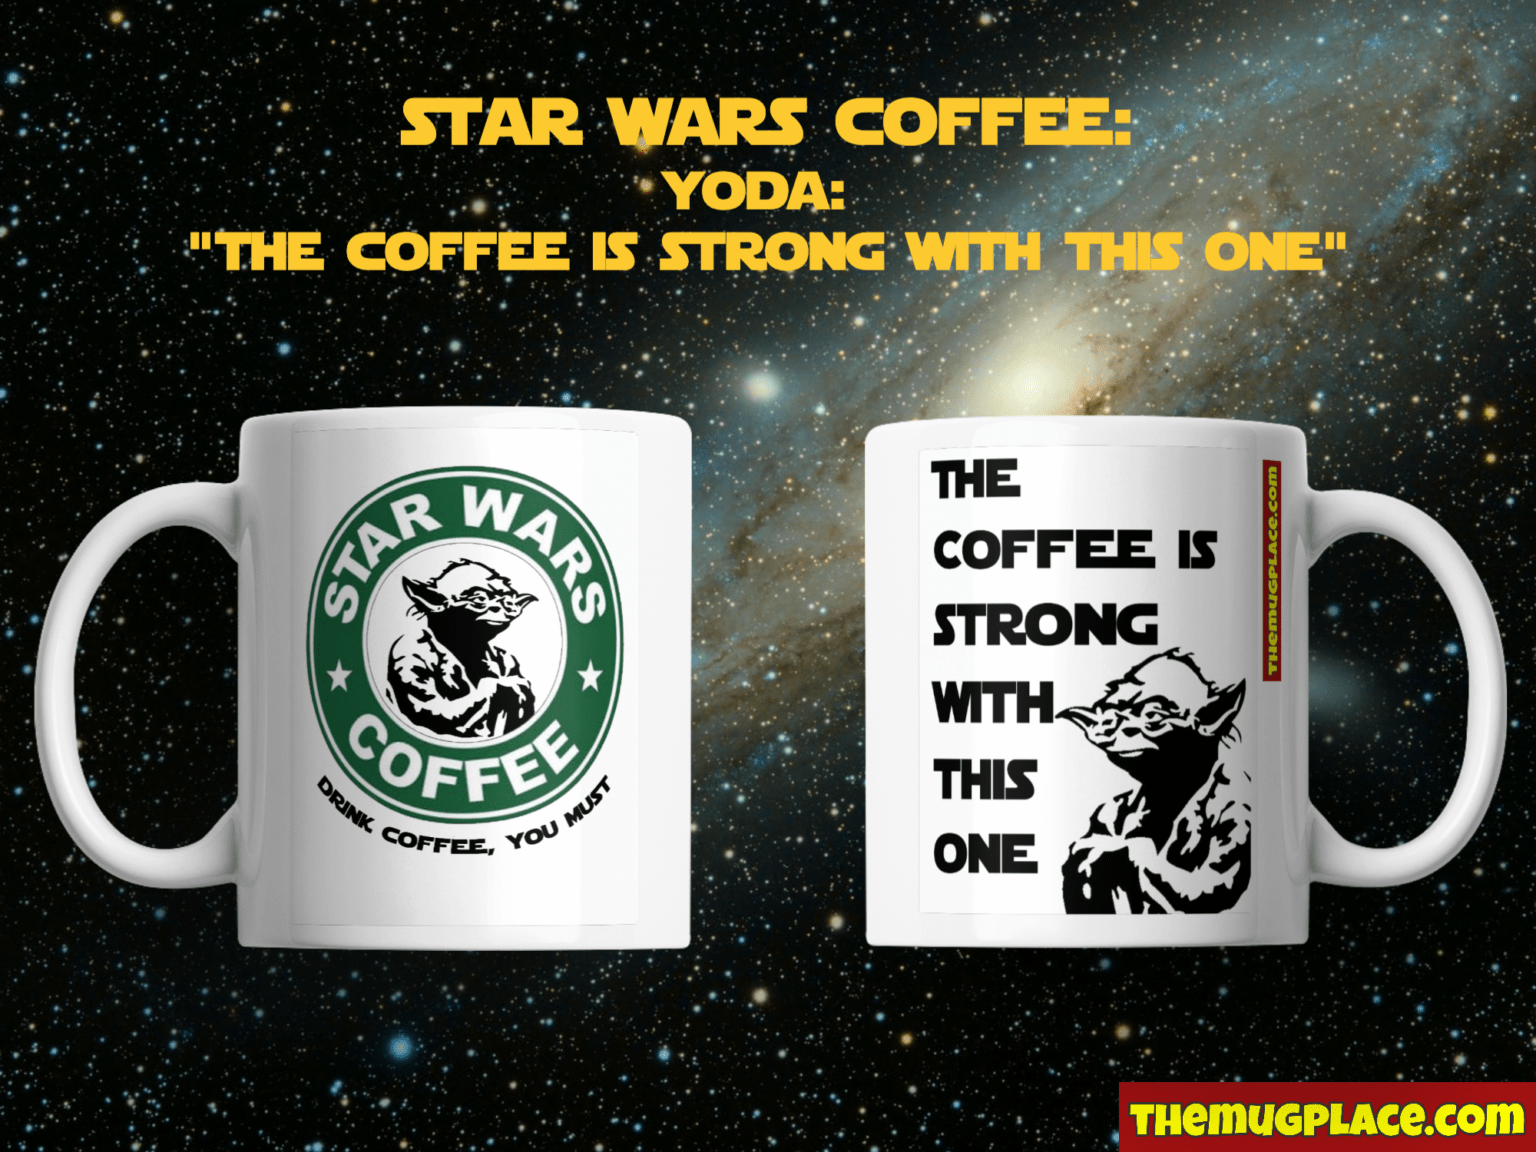 Star Wars Yoda Mug - The coffee is strong with this one